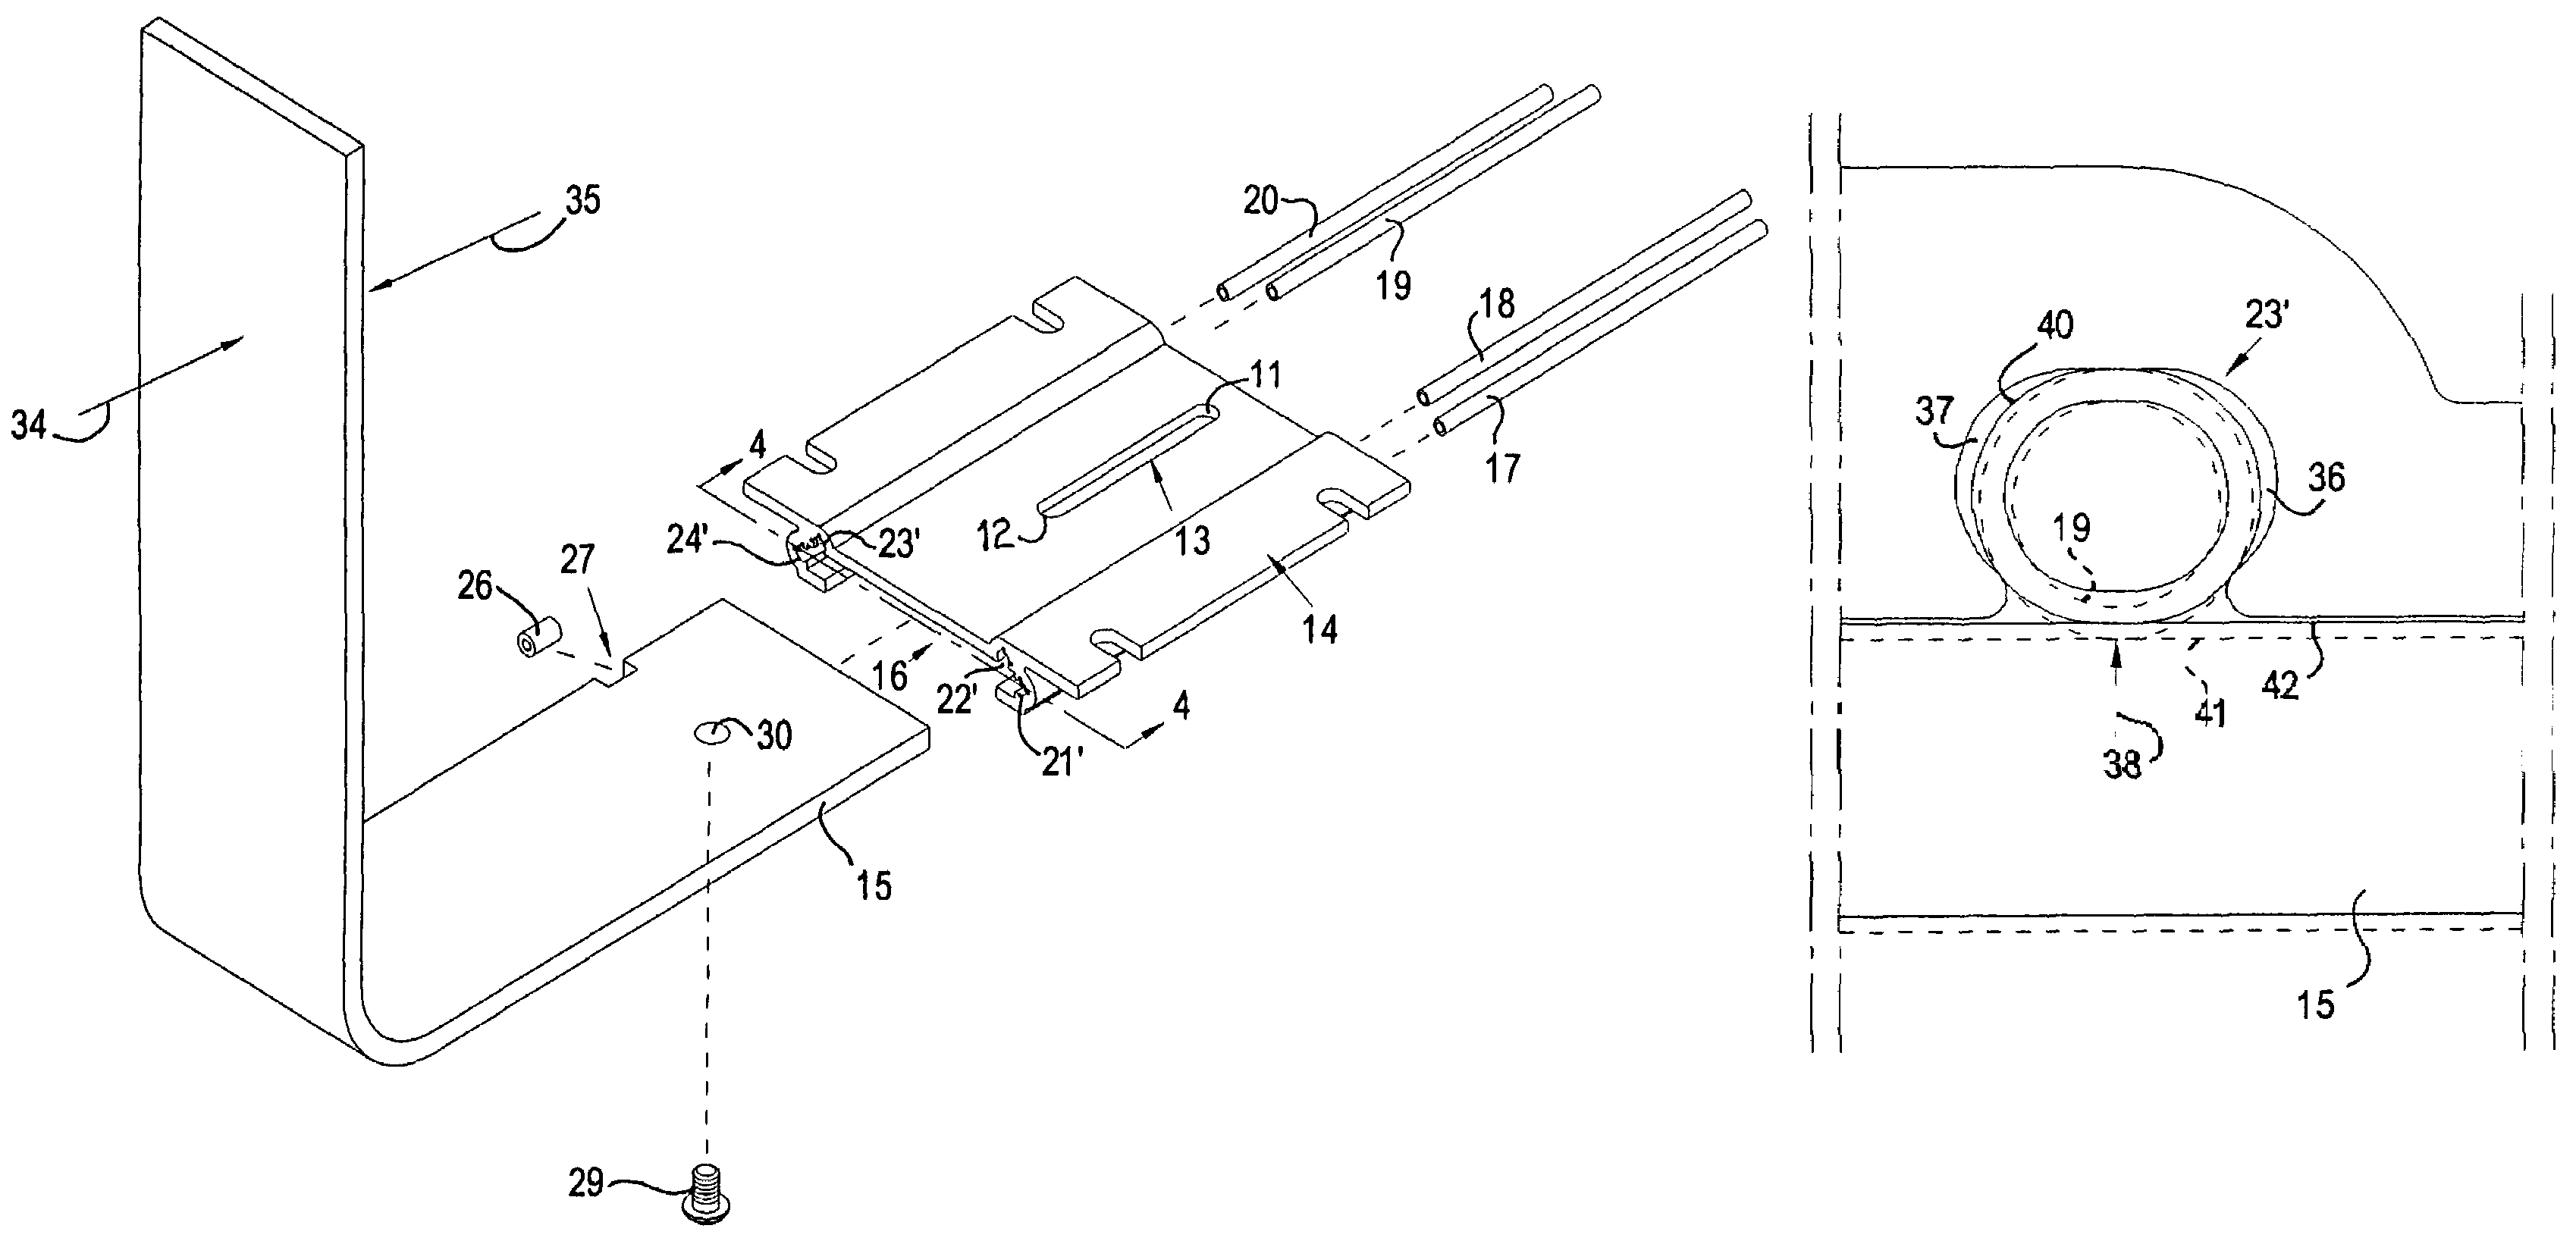 Positioning device for furniture